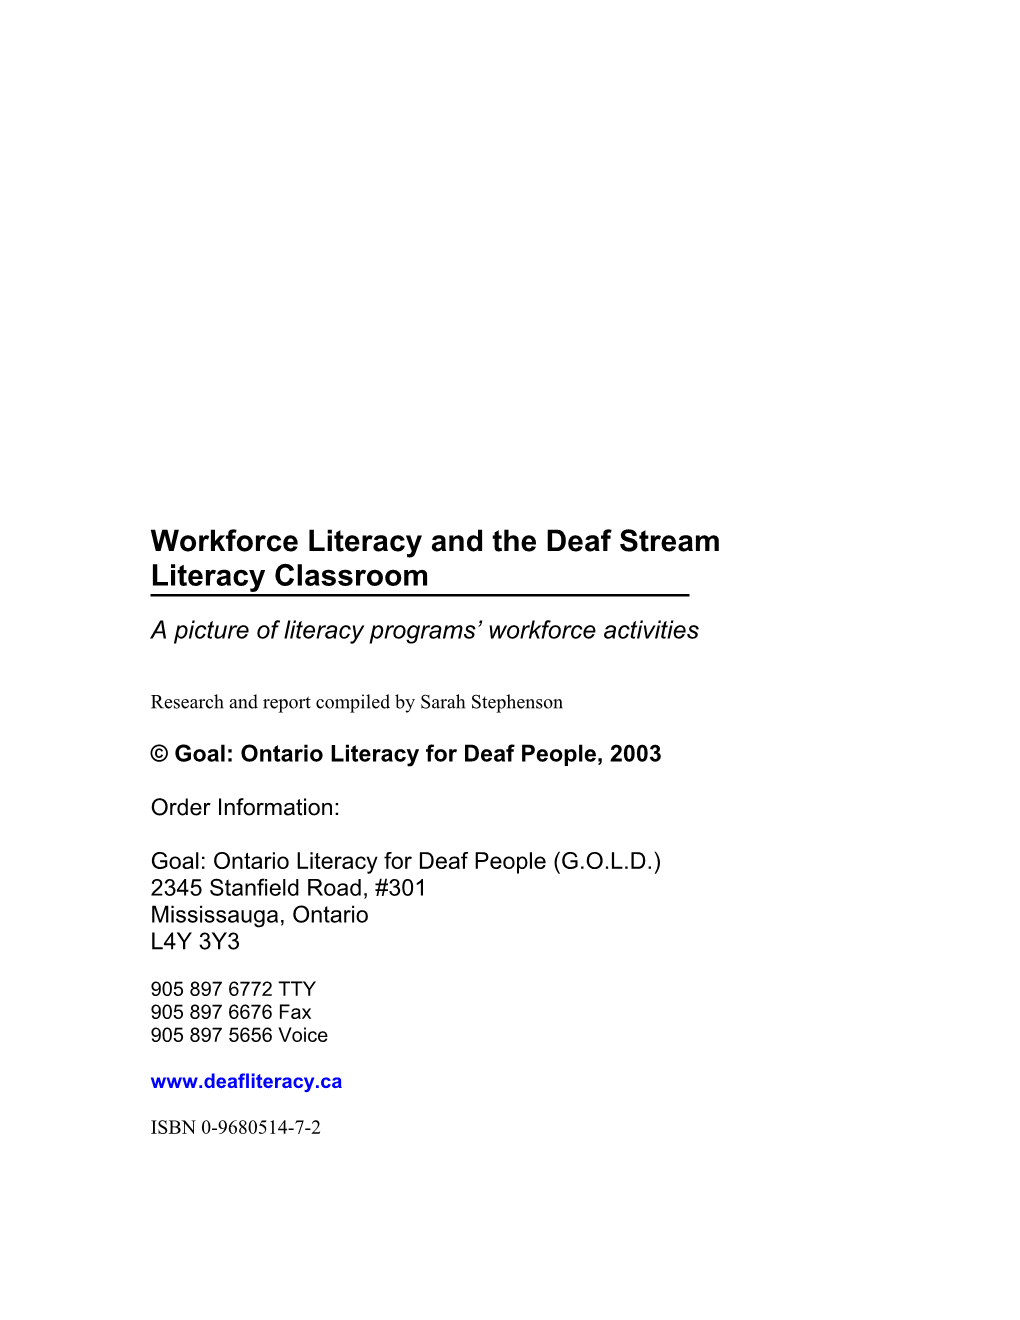 Workforce Literacy and the Deaf Stream Literacy Classroom